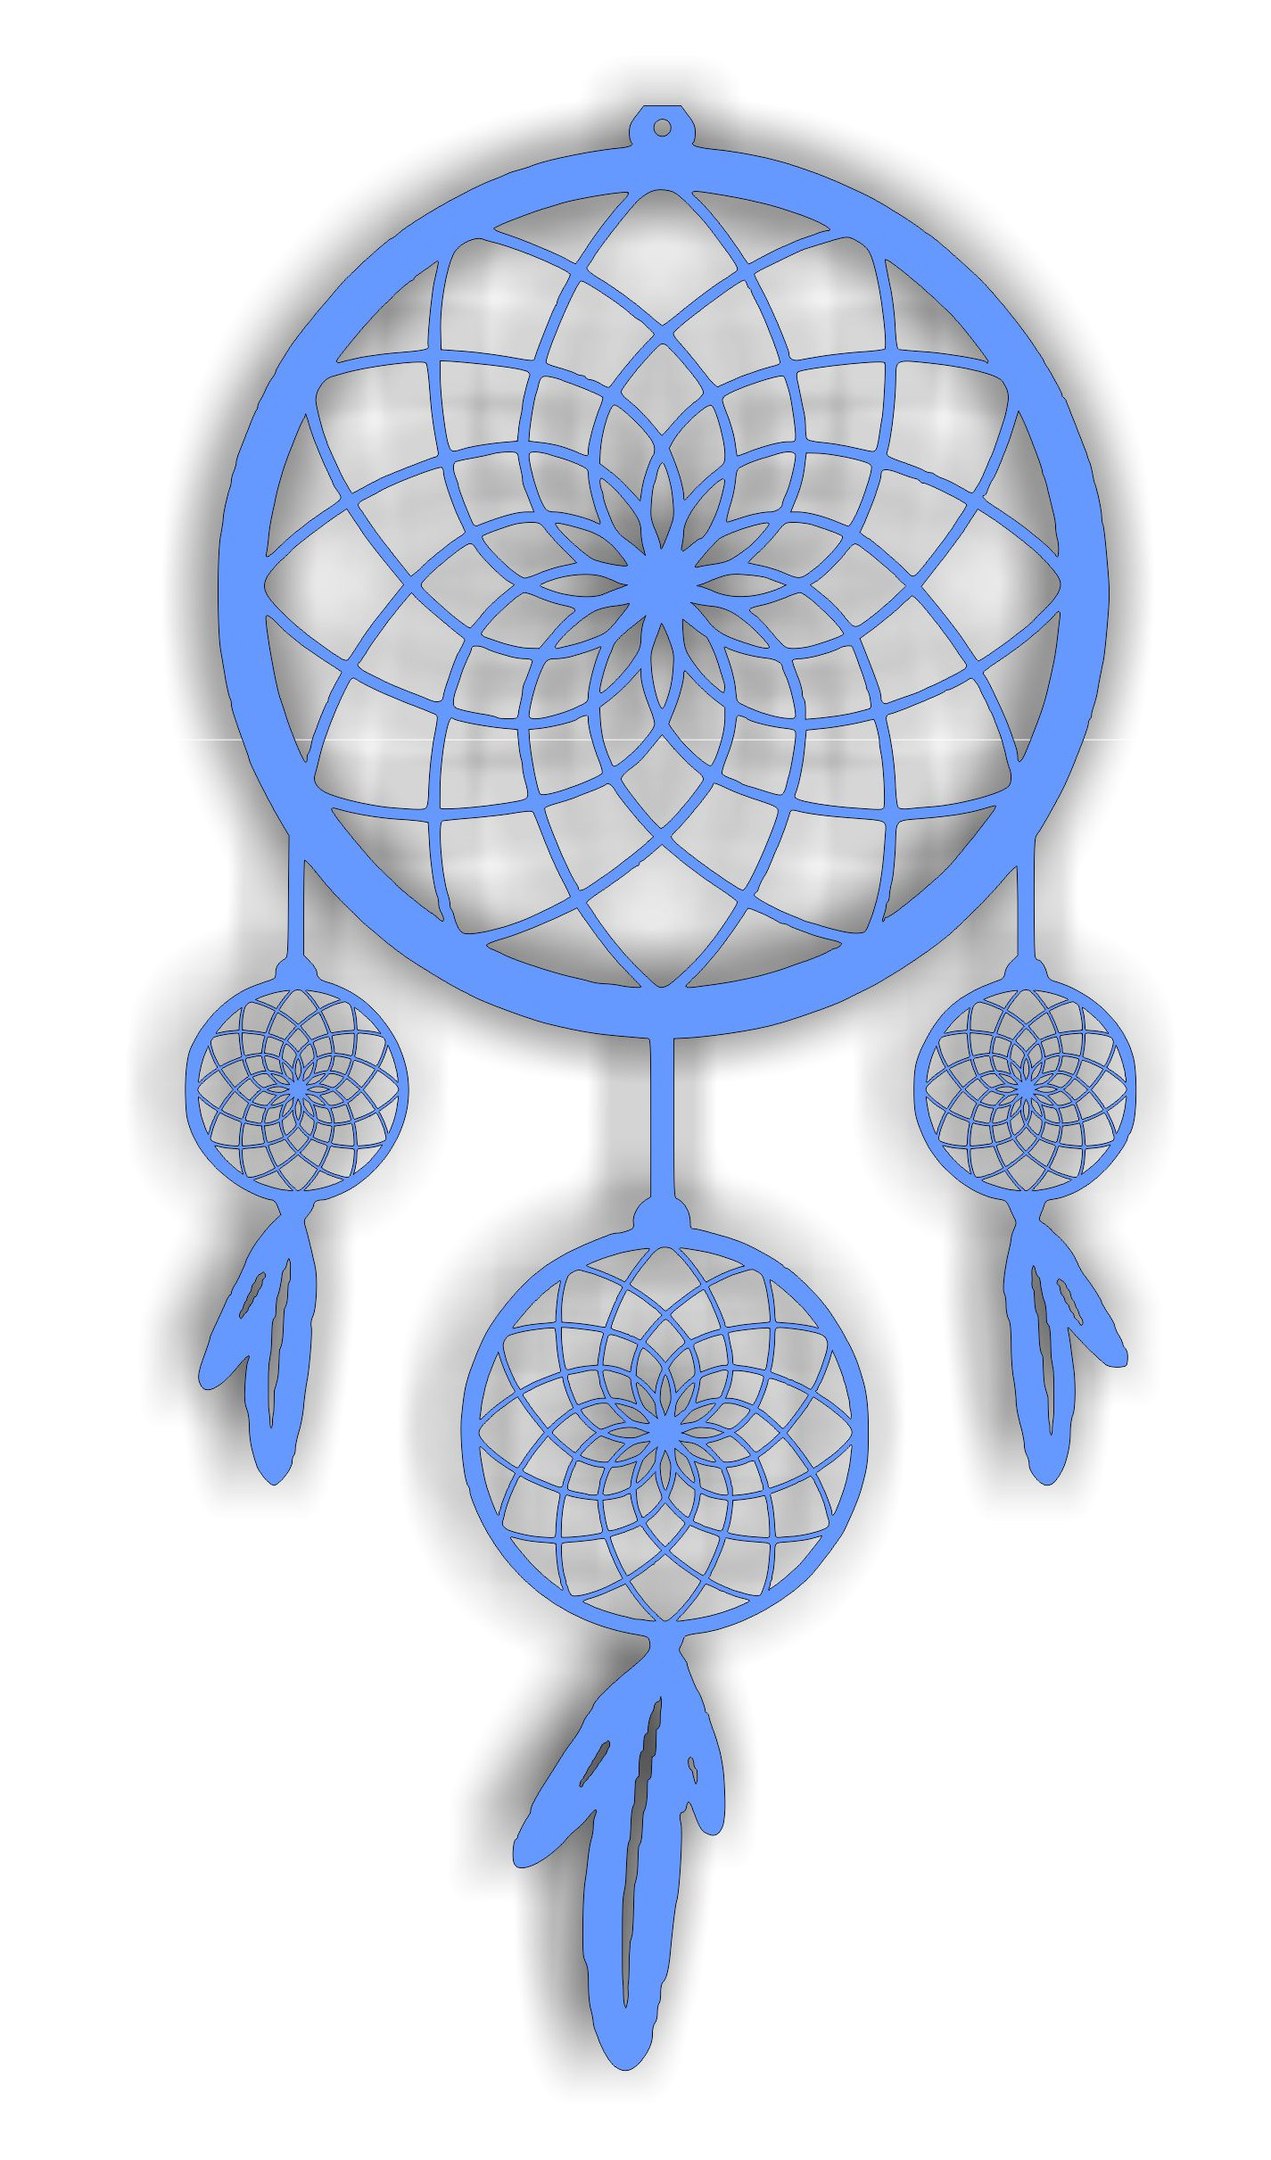 Dream Catcher Free Vector For Cutting Free CDR Vectors Art